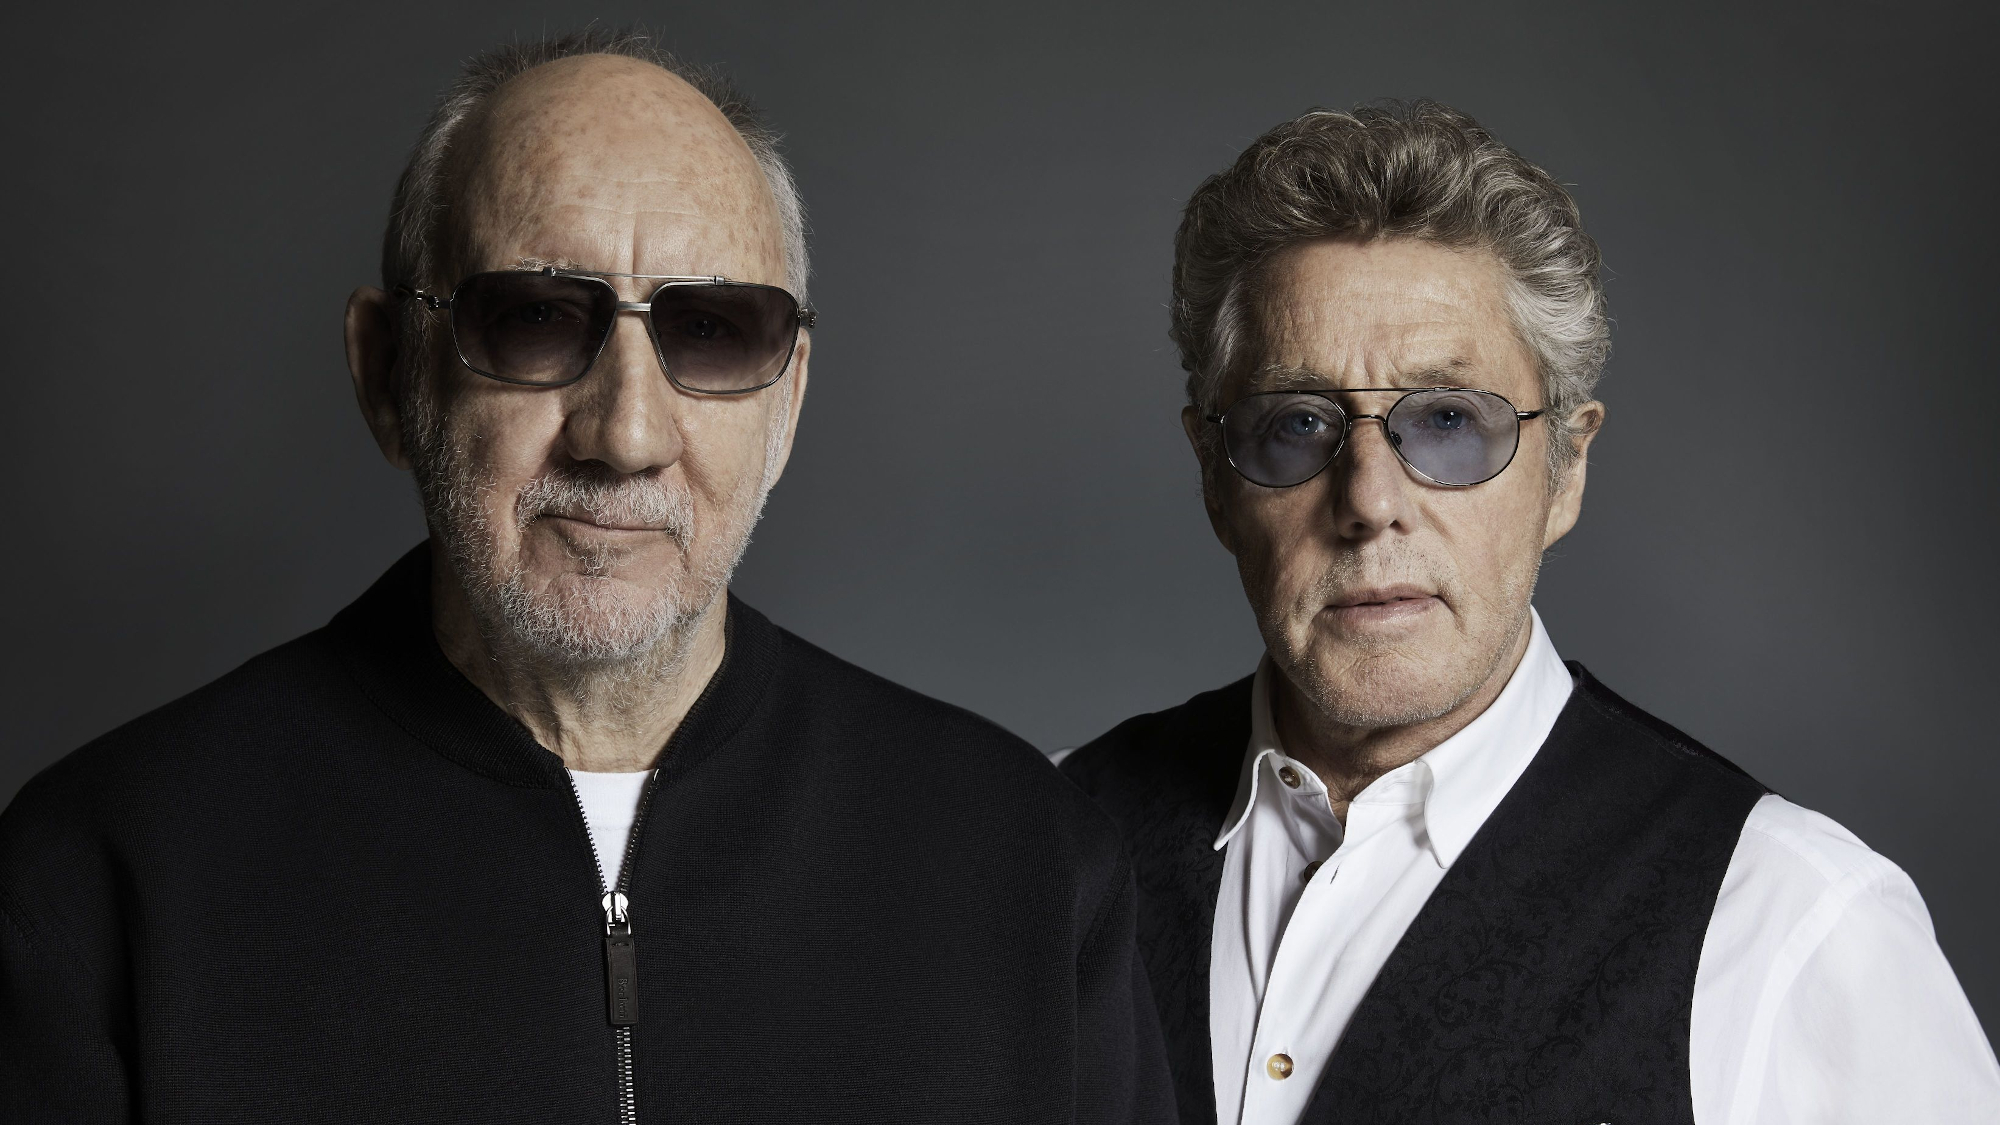 thewho album download recensione